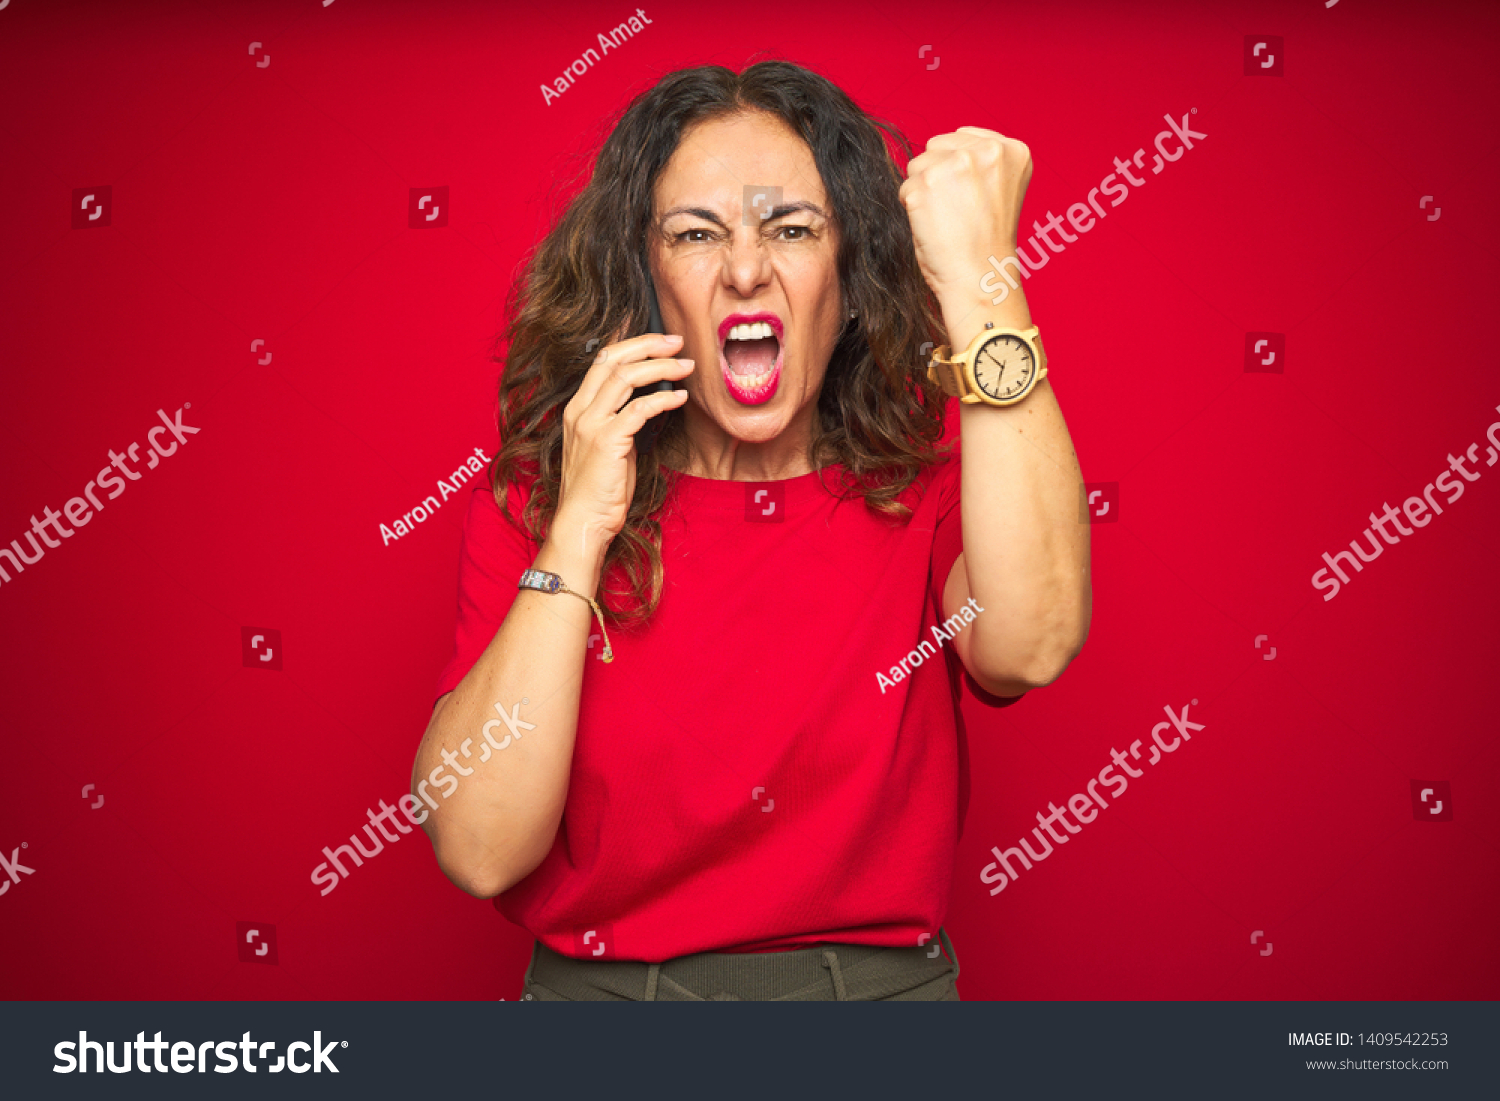 Middle age senior woman talking on the phone over red isolated background annoyed and frustrated shouting with anger, crazy and yelling with raised hand, anger concept #1409542253